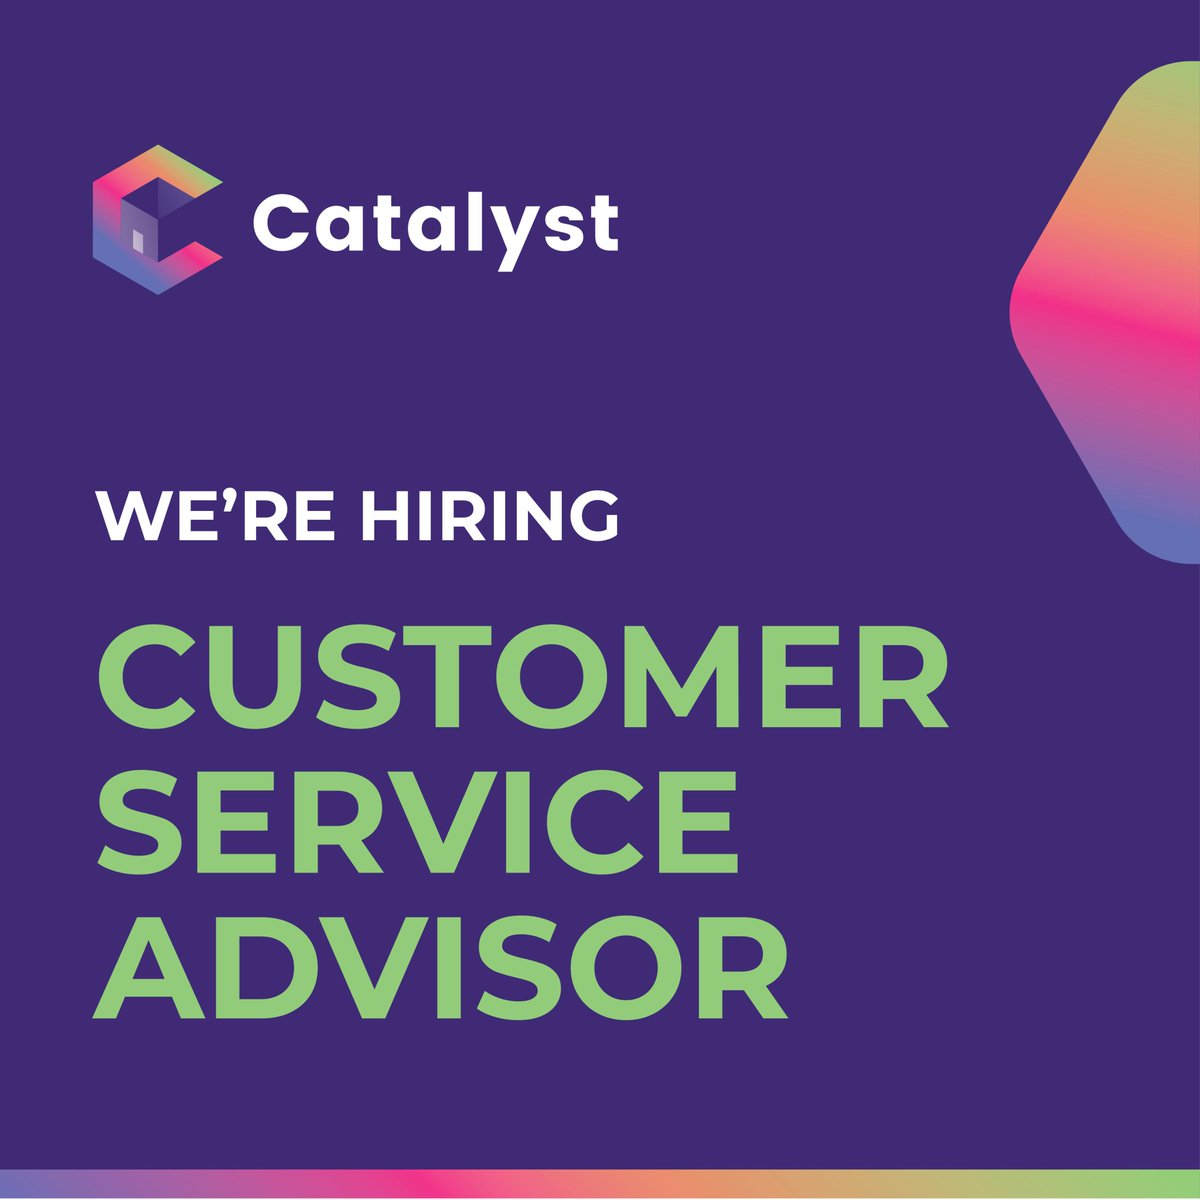 📢We’re Hiring!
Catalyst is growing and we’re looking for fantastic people to join our team.

Check out our vacancies: catalystservicesuk.com/careers-at-cat…

@OldhamCouncil #jobs #vacancies #oldhamjobs #hiringnow #recruiting #jobsearch #northwestjobs #insurancejobs